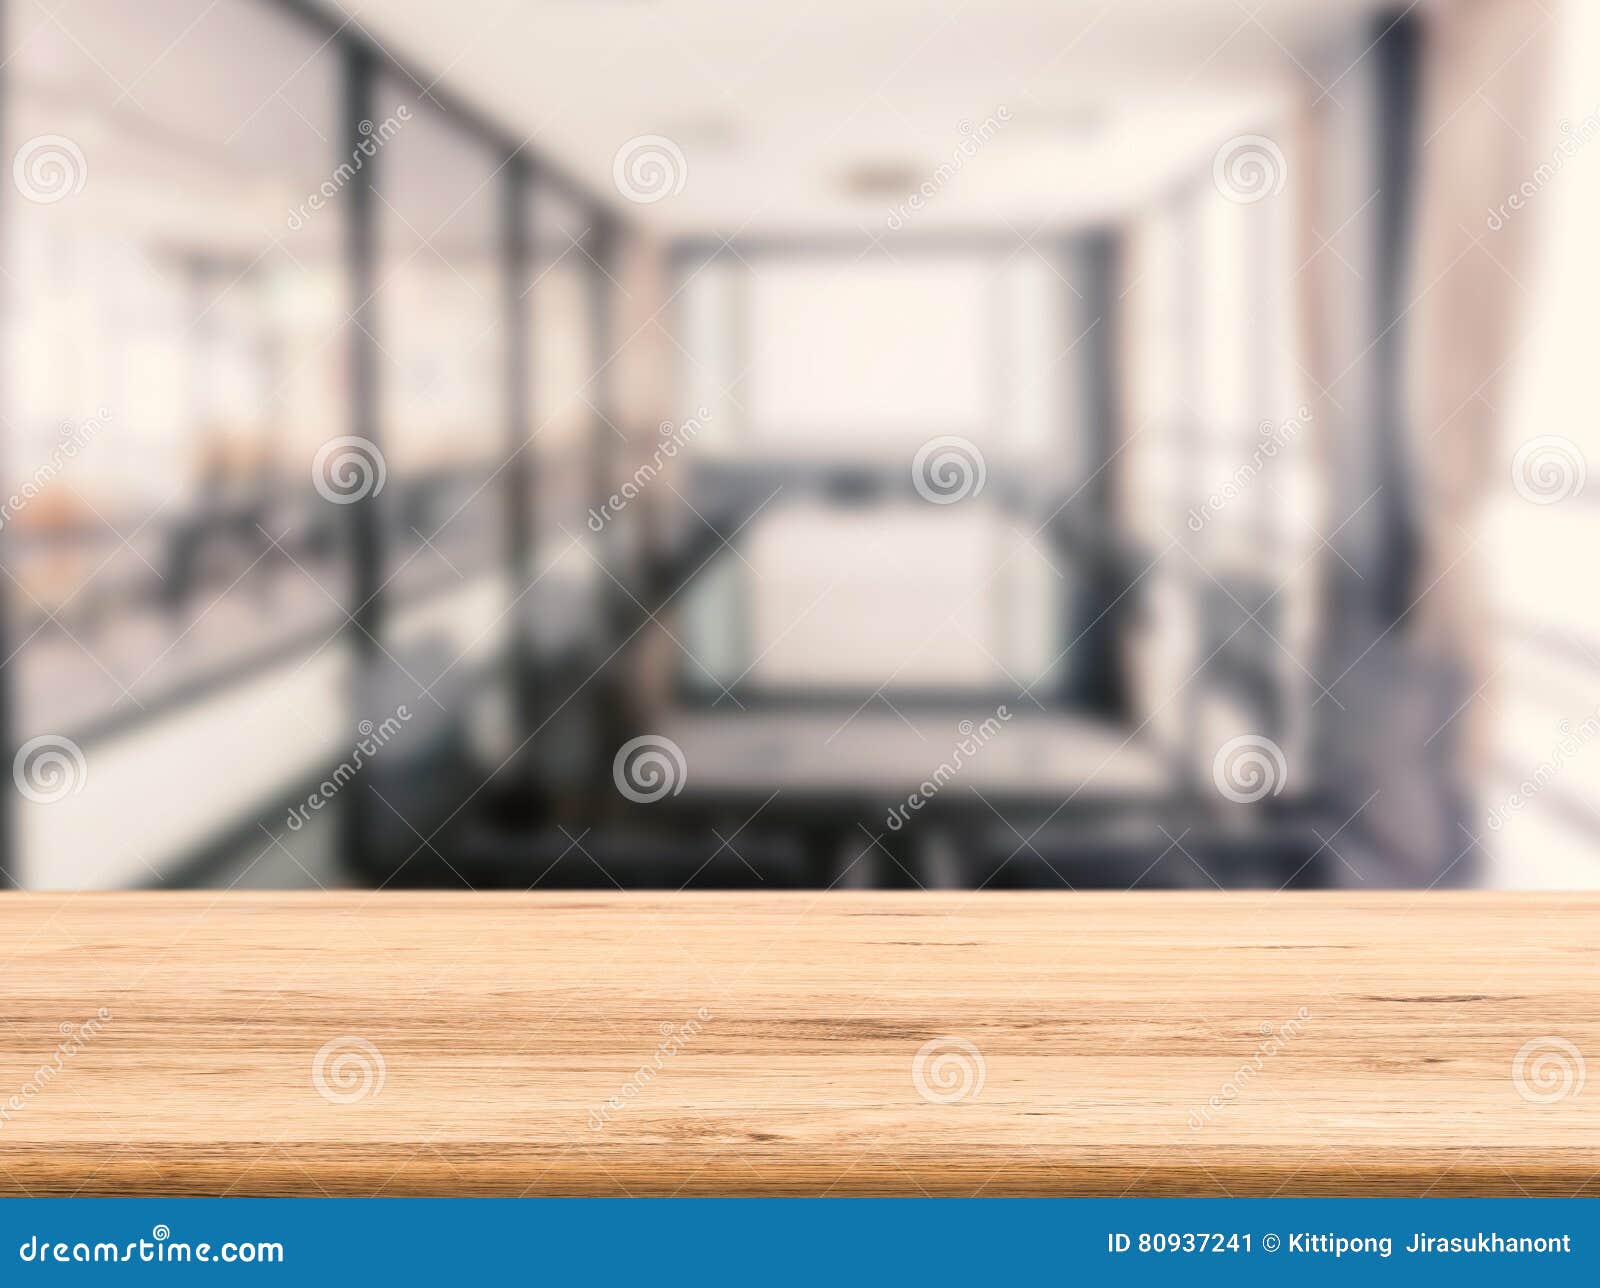 Wooden Desk with Office Background Stock Image - Image of conference, desk:  80937241